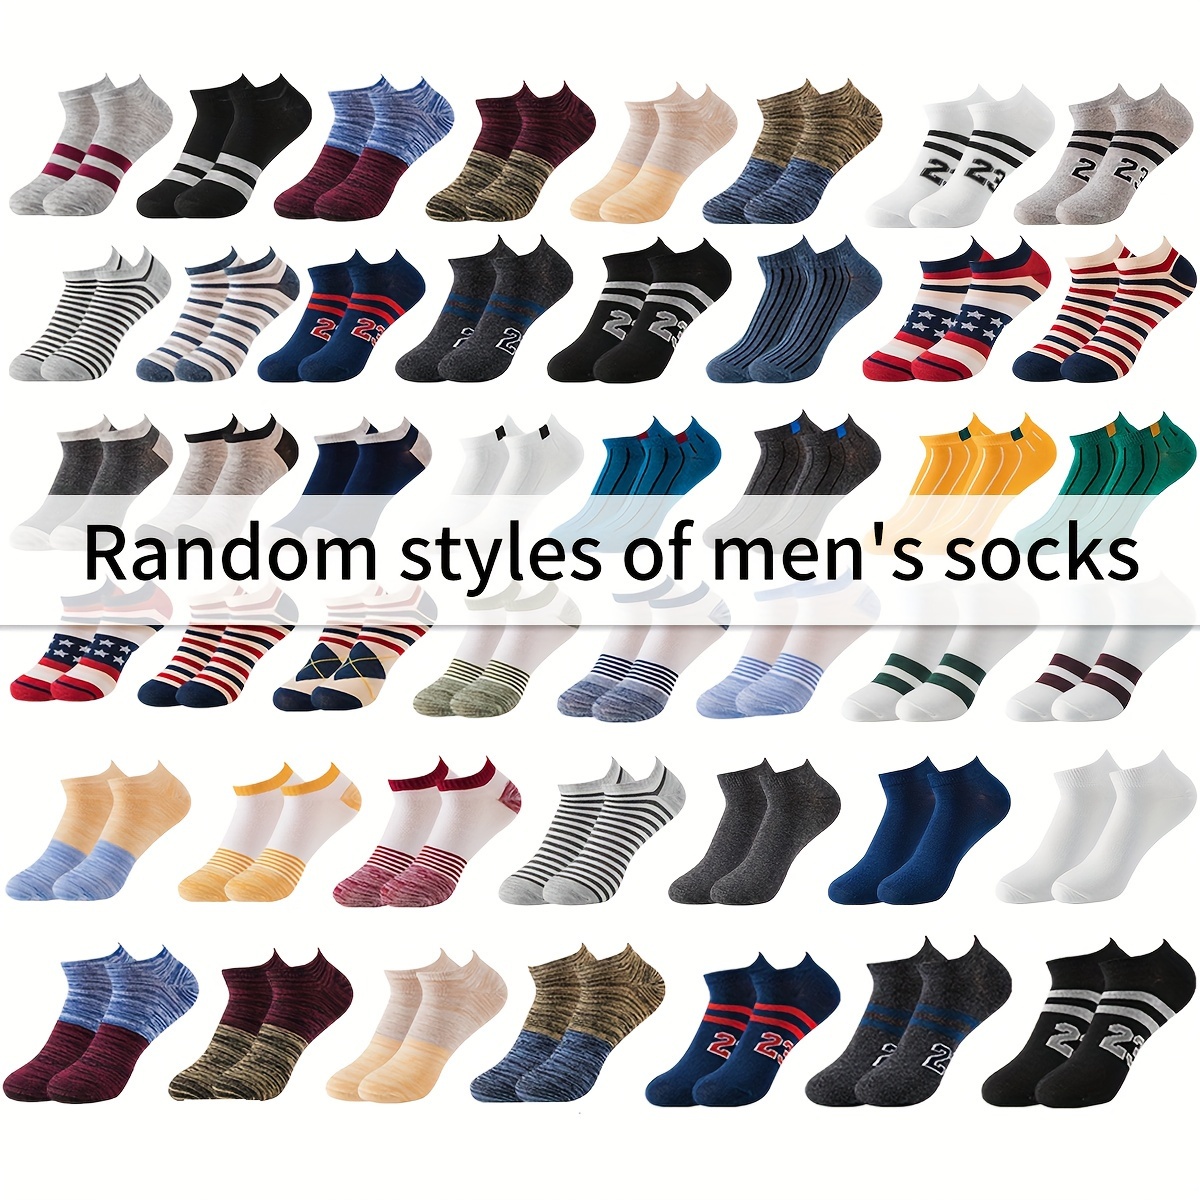 

30 Or 50 Or 100 Pairs Of Men's Anti Odor & Sweat Absorption Extra Low Cut Socks, Comfy & Breathable Thin Socks, For Spring & Summer